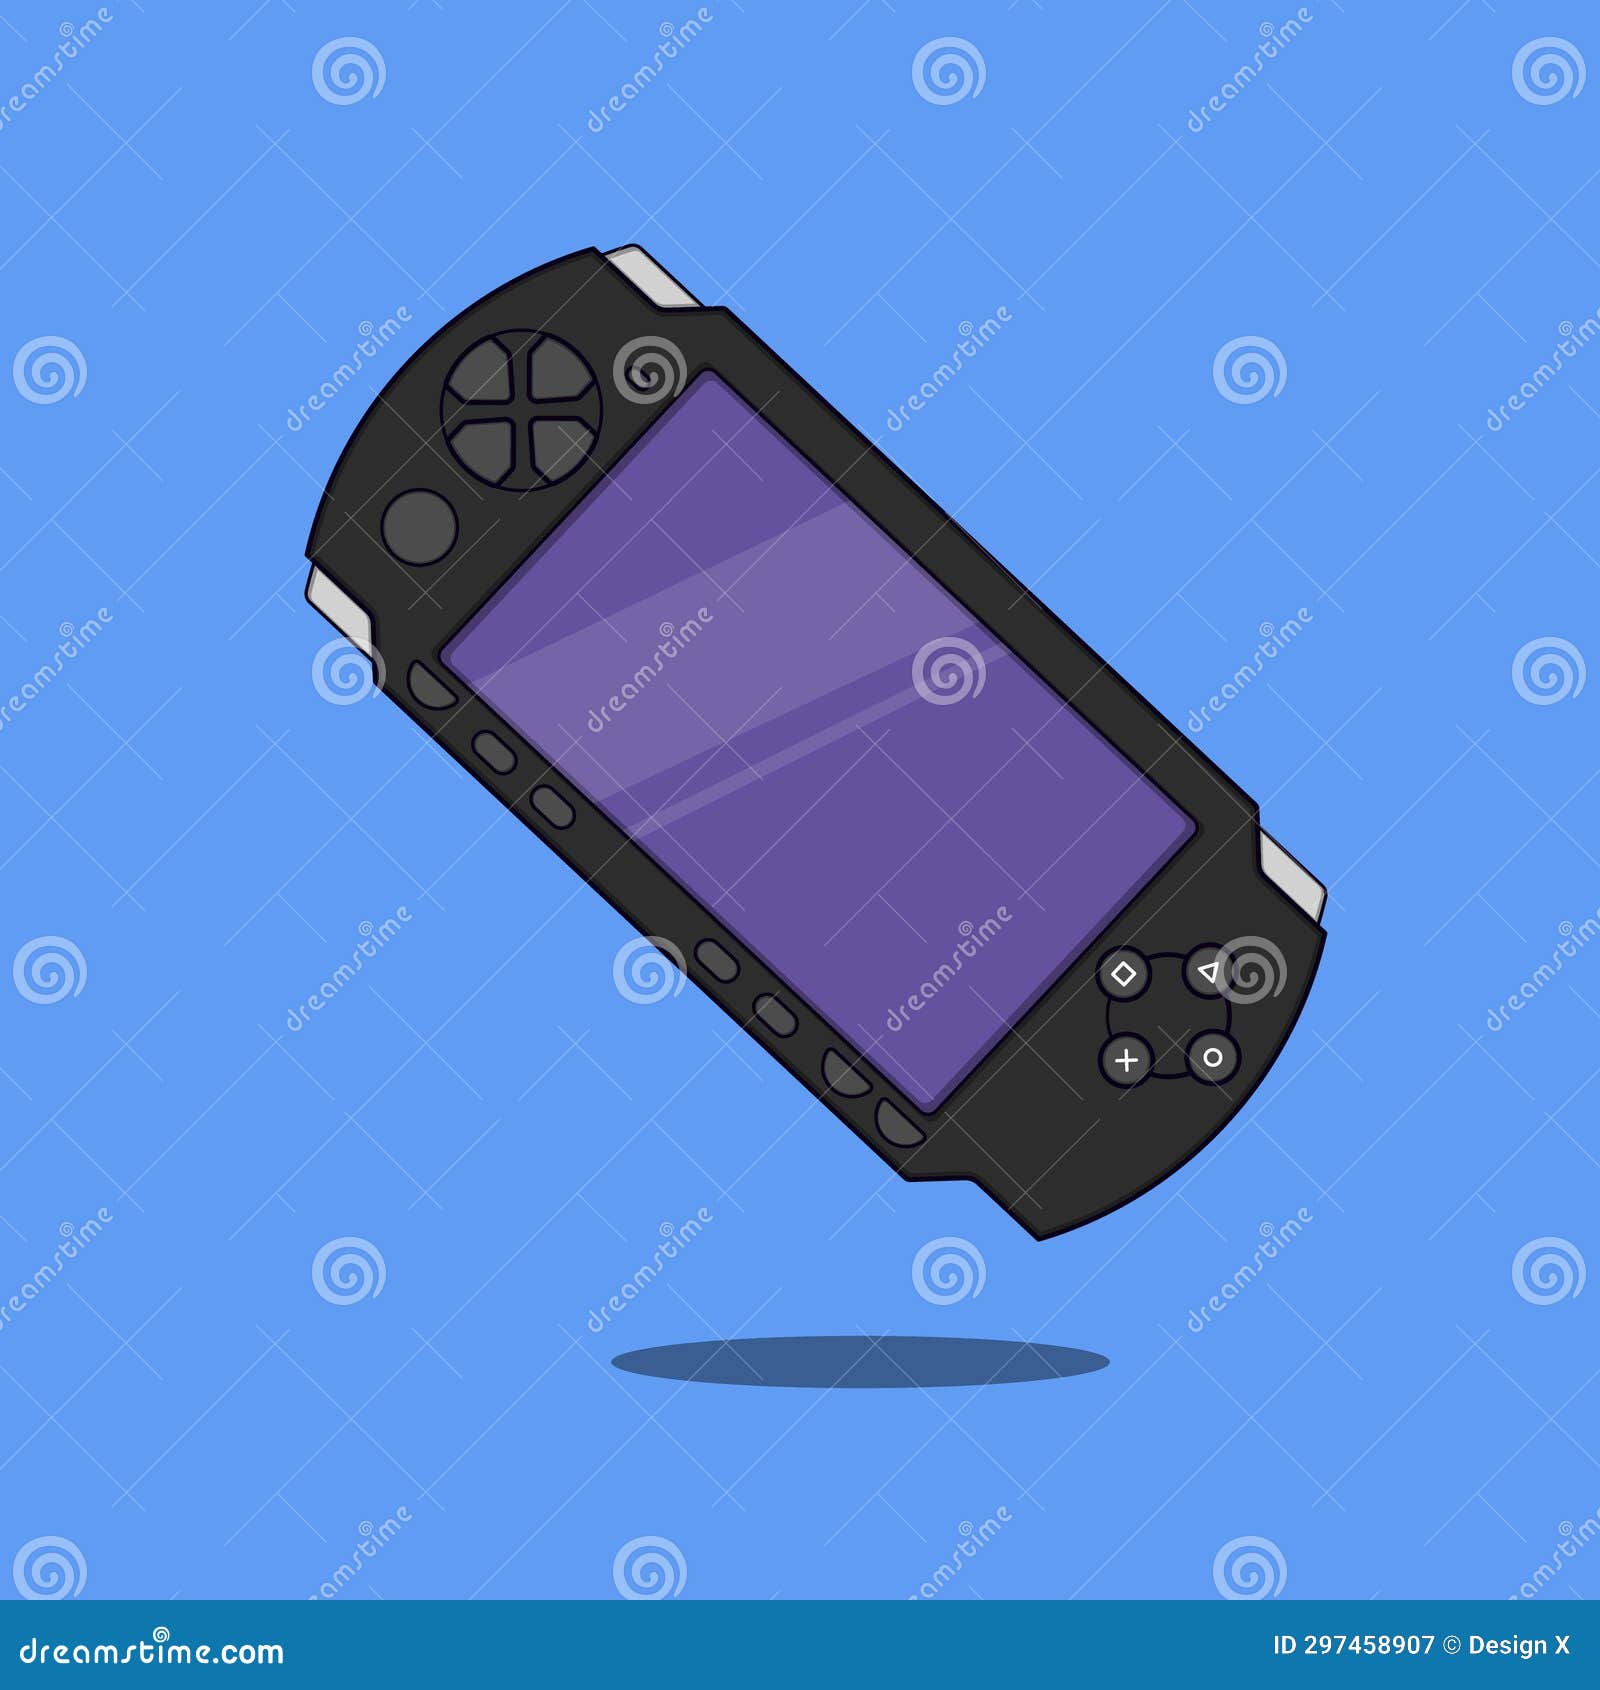 psp gaming console  icon psp gaming 